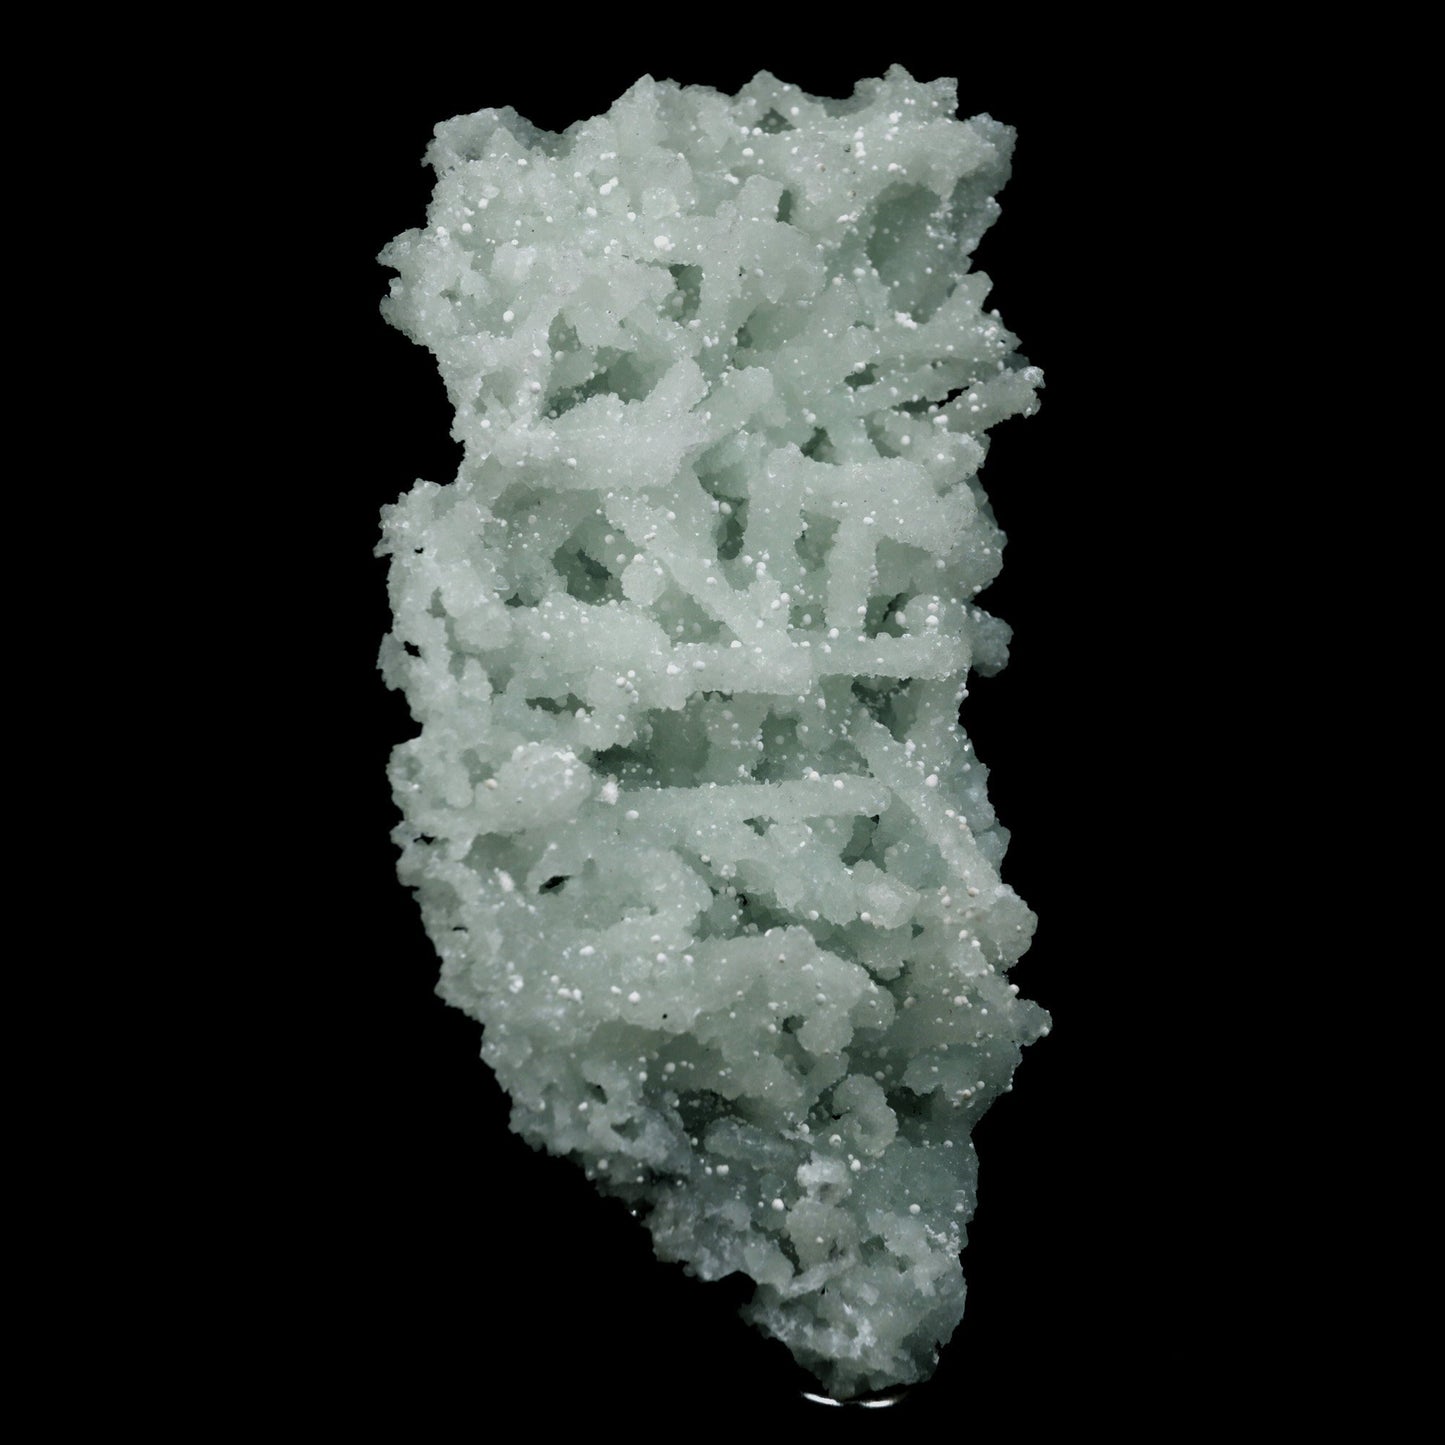 Prehnite Rare Find Natural Mineral Specimen # B 4756  https://www.superbminerals.us/products/prehnite-rare-find-natural-mineral-specimen-b-4756  Features: A coveted jackstraw cluster of elongated laumontite crystals that pseudomorphed from mint-green, translucent prehnite crystals has been discovered in the United Kingdom.The Malad Quarry, located near Mumbai, is a well-known source of classic and excellent vintage material for restoration projects